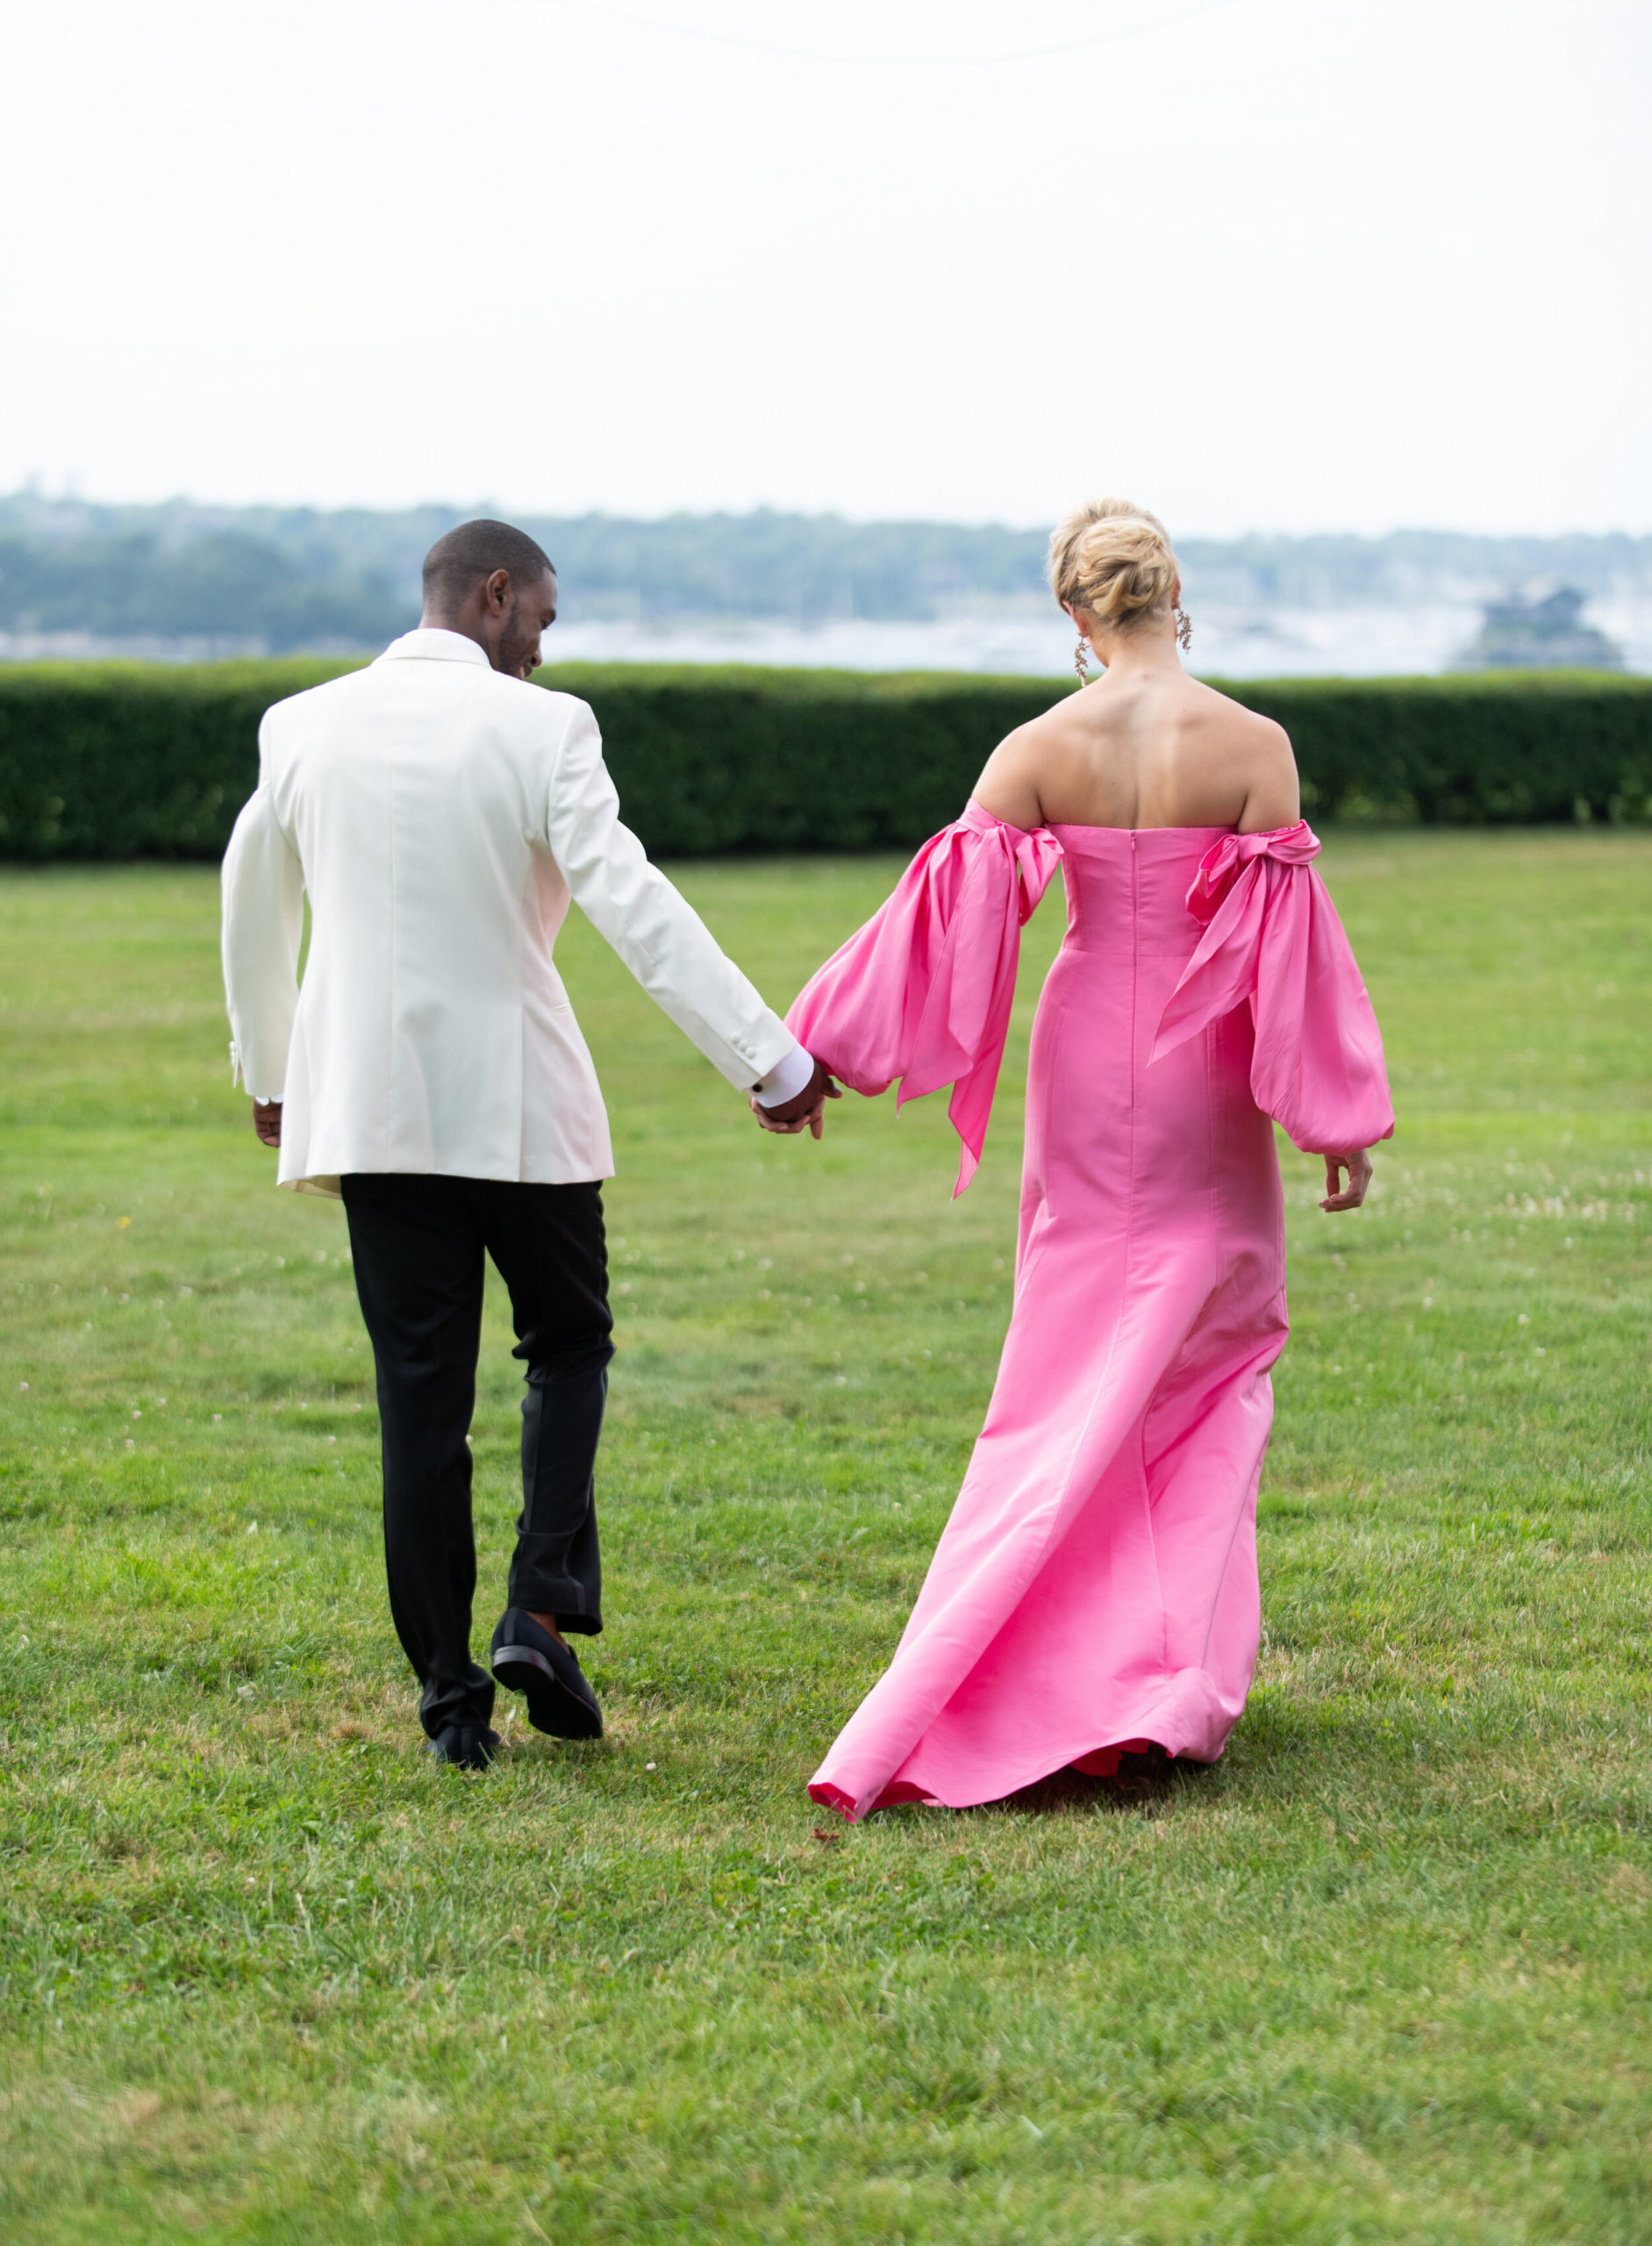 Pink Carolina Herrera Gown at Eisenhower House in Newport, RI for Bliss Celebrations Magazine - Pearl Weddings &amp; Events